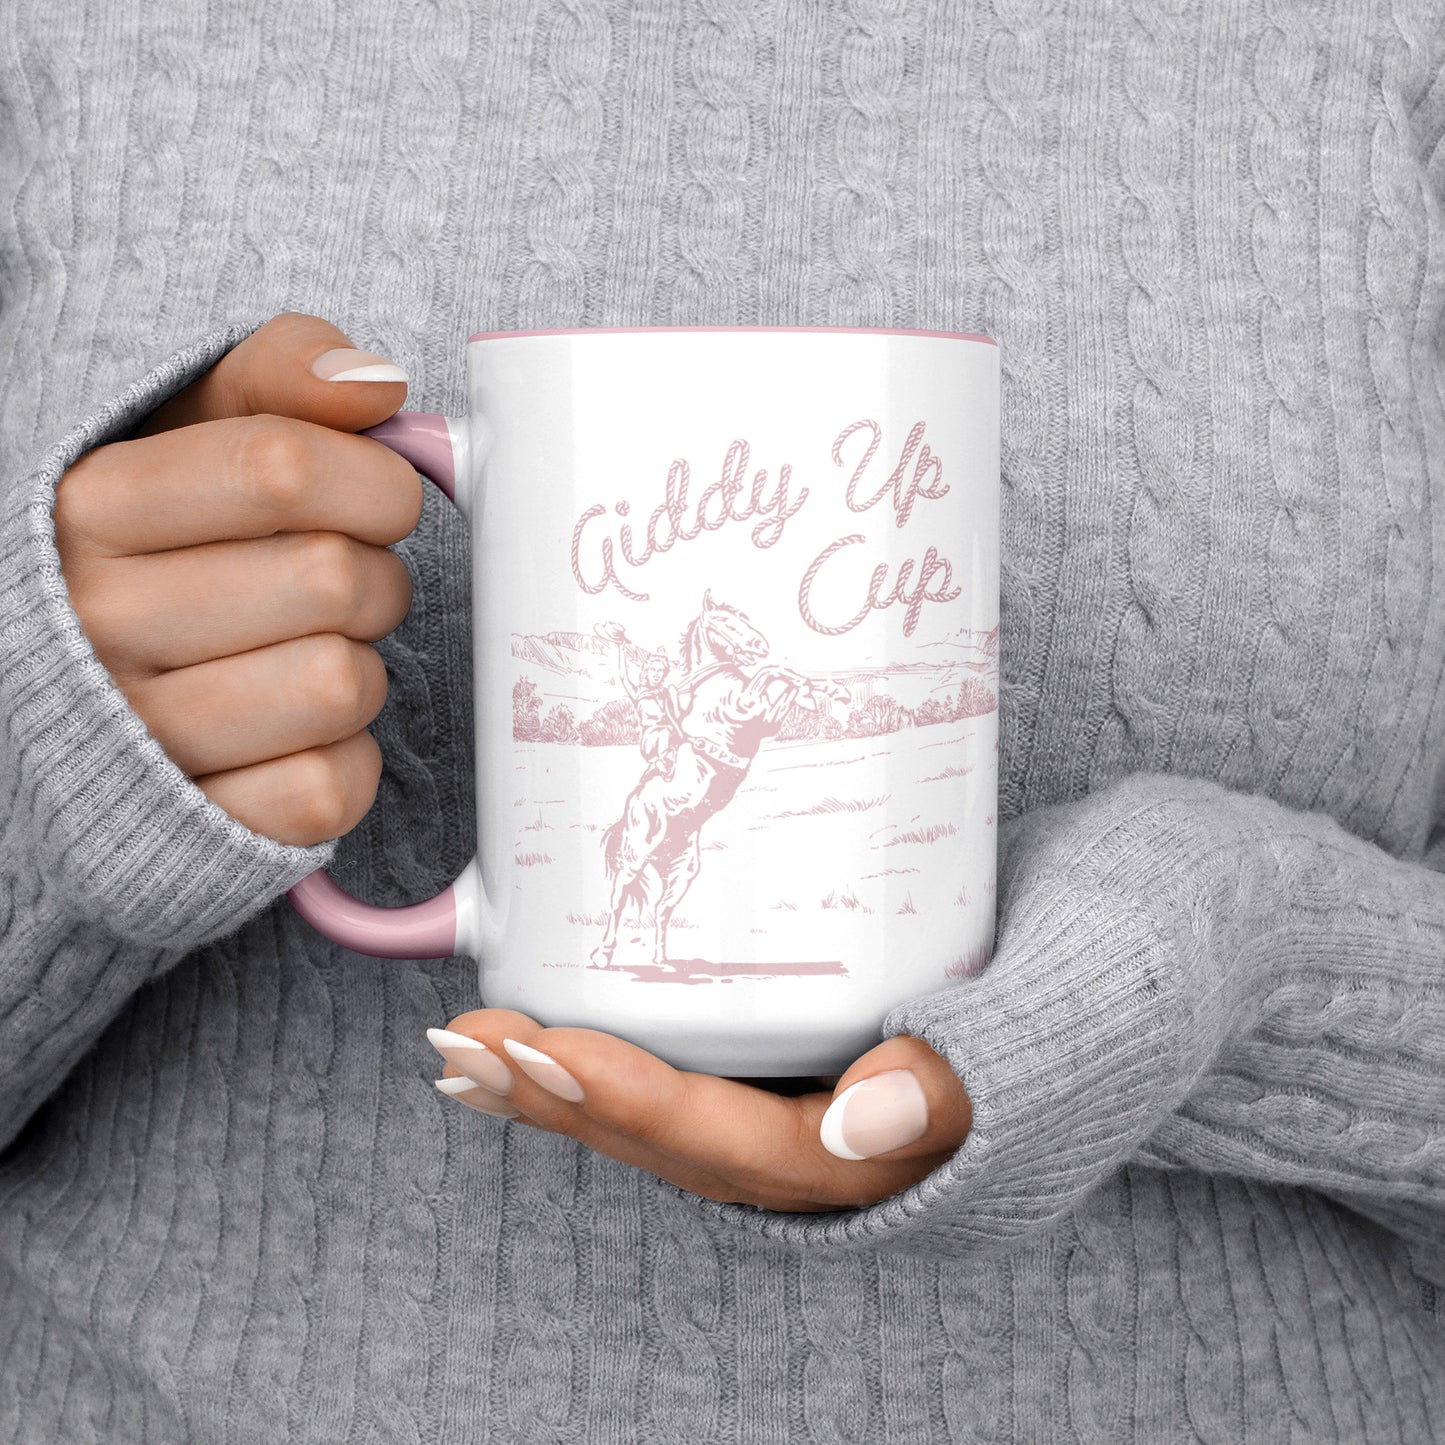 GIDDY UP CUP - Pink Handle - Pink